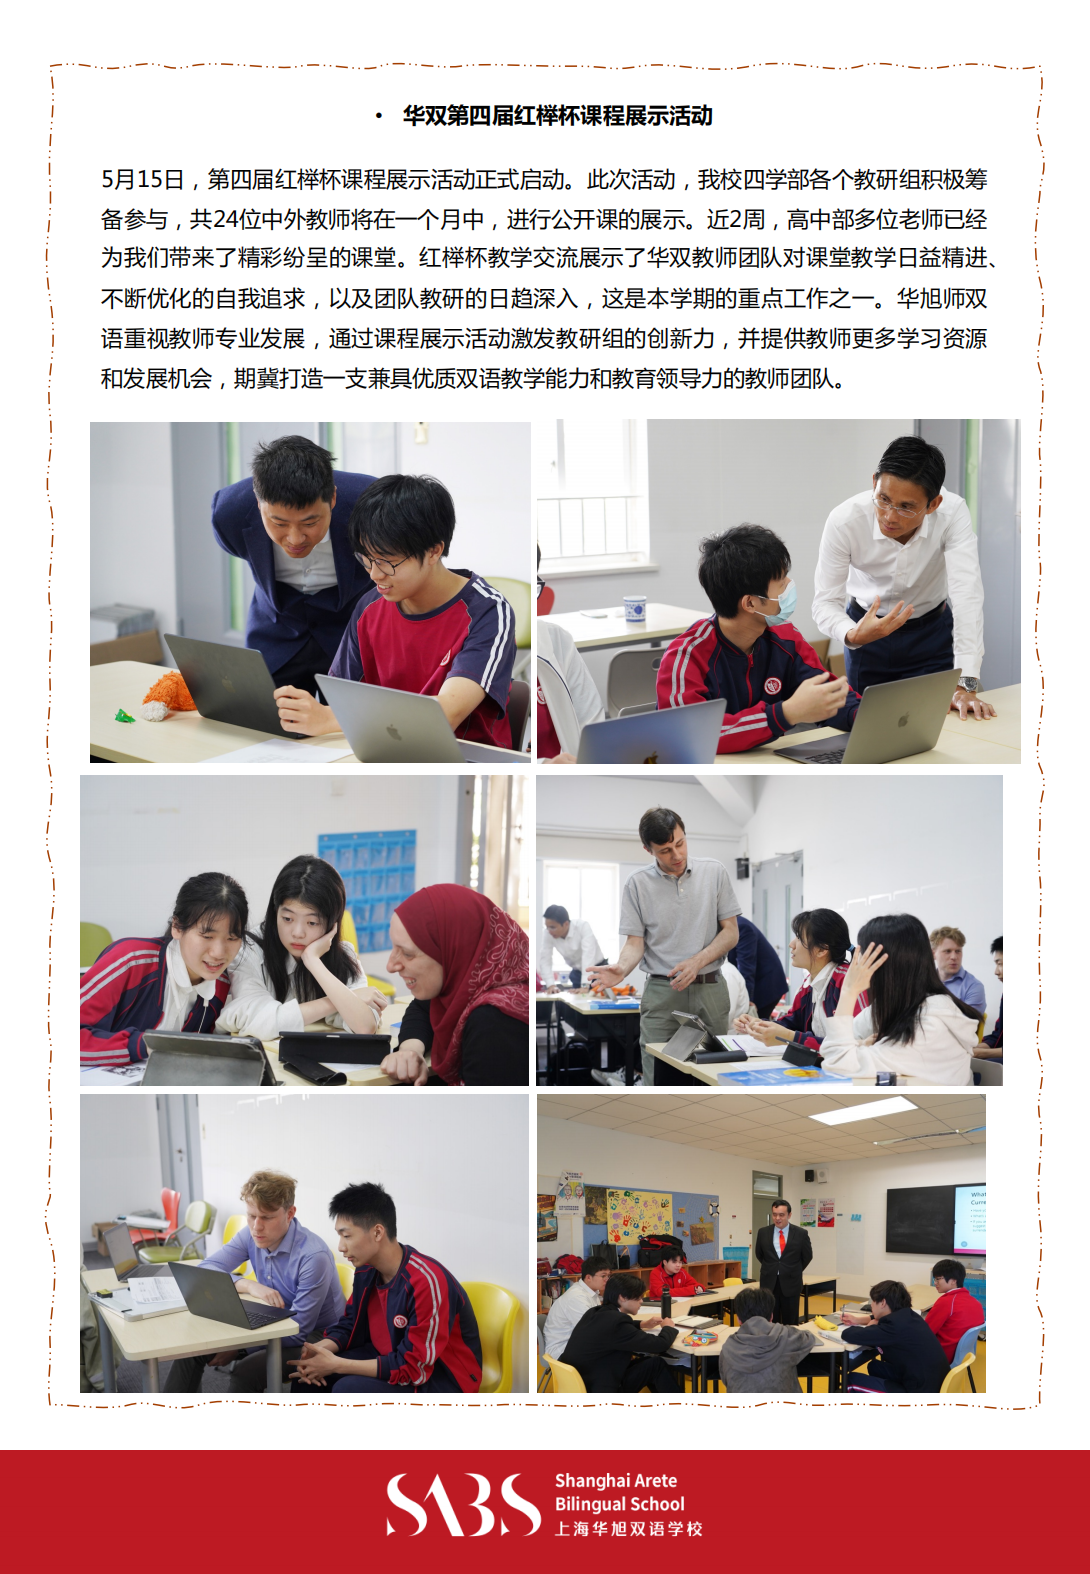 HS 7th Issue Newsletter pptx（Chinese）_05.png